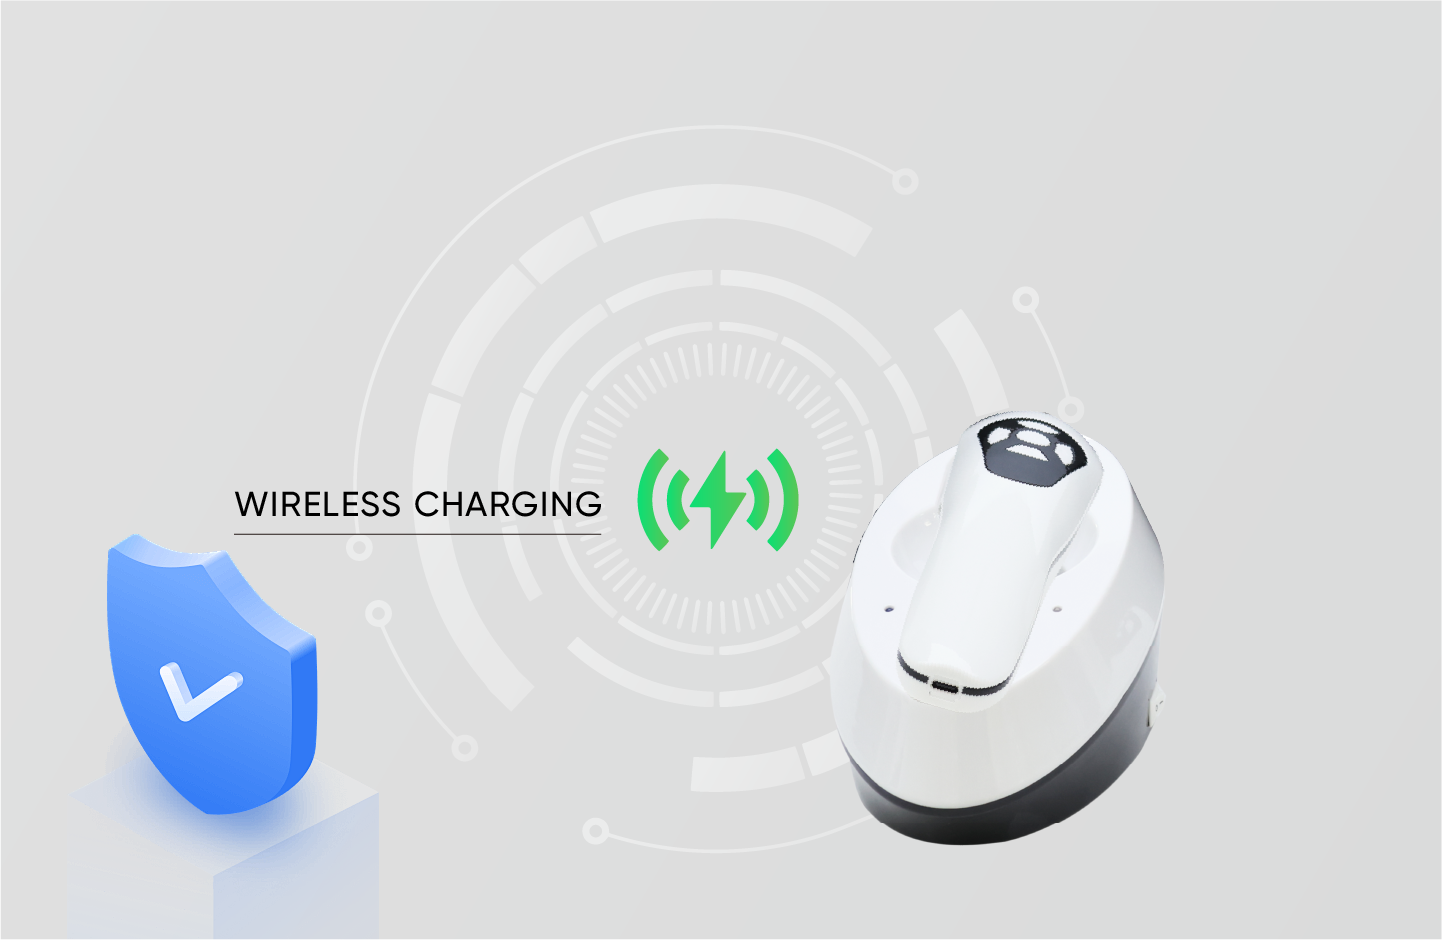 Unique 2-in-1 Detachable Design, Complens Wireless Charging Technology